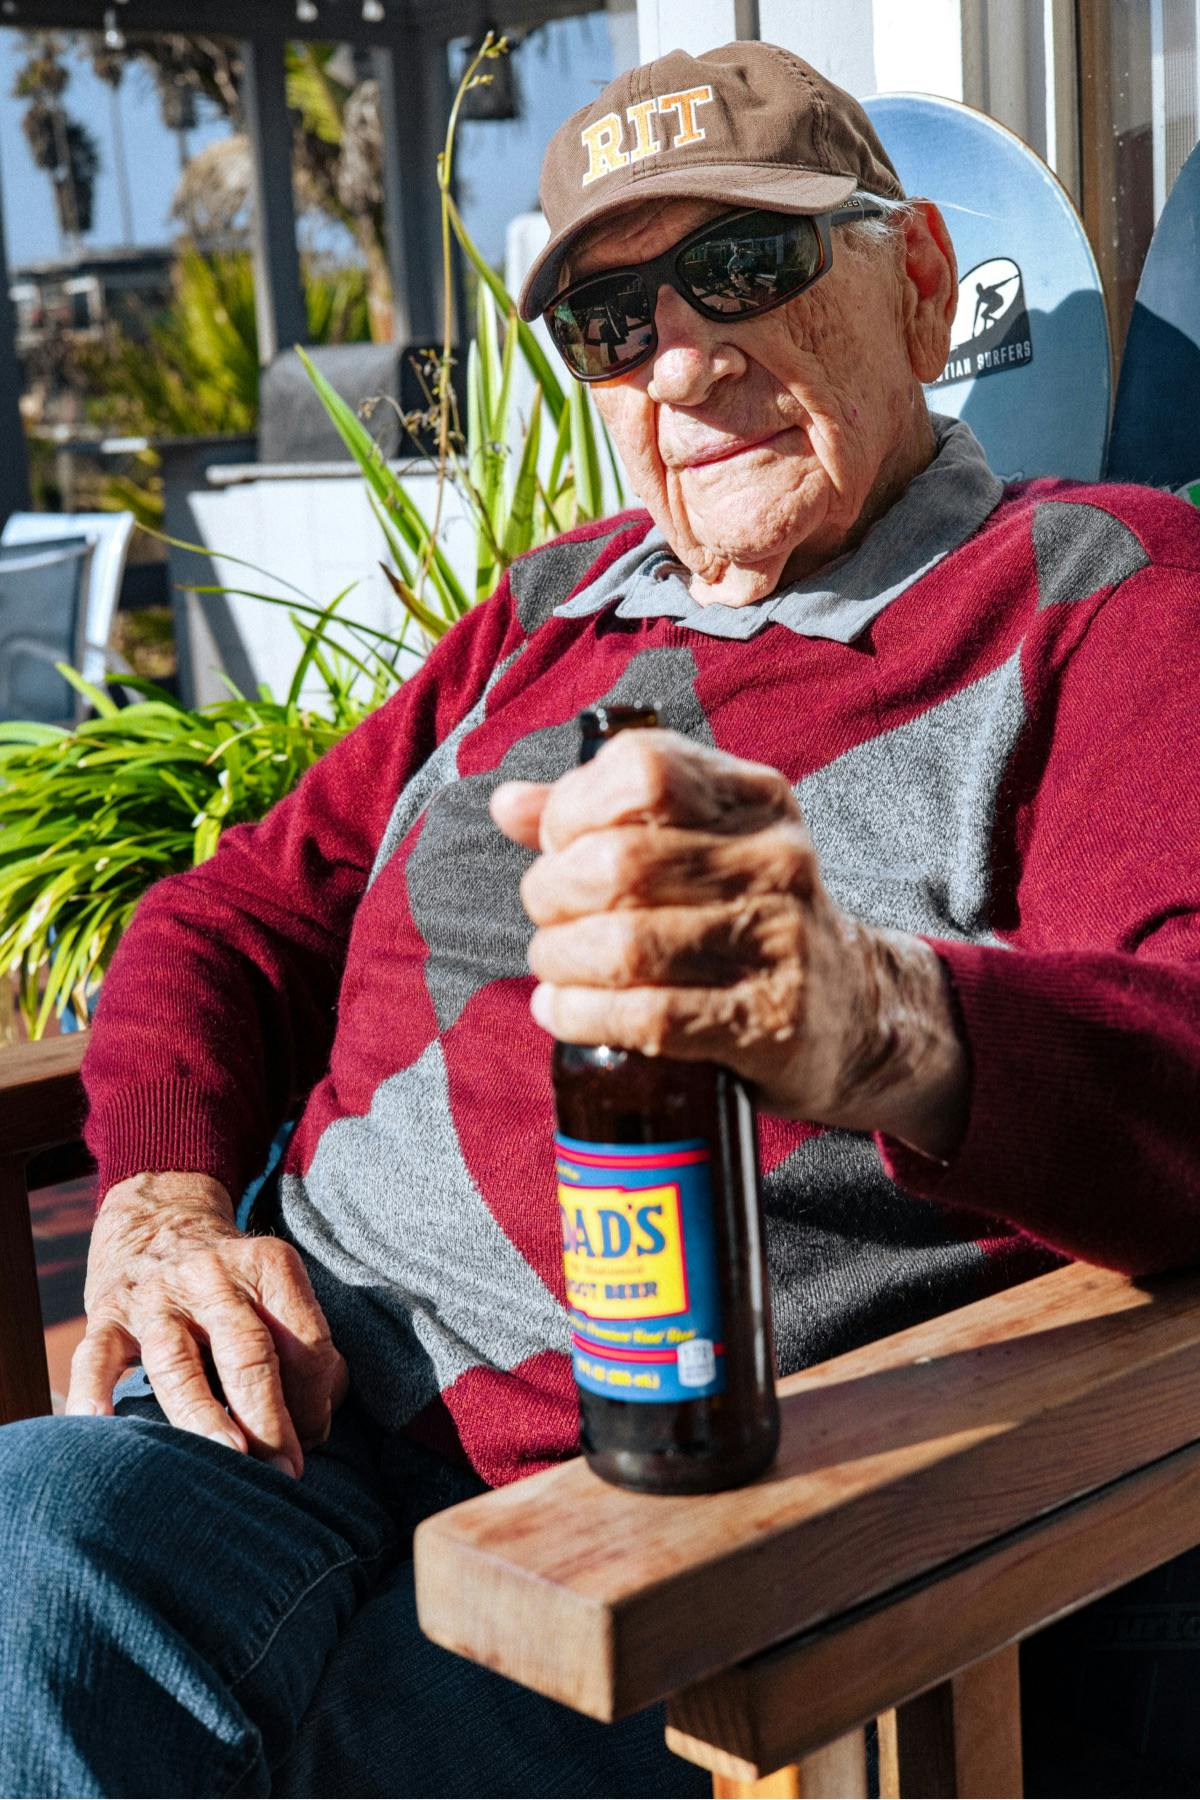 Bob Rittenhouse enjoys a bottle of Dad's root beer